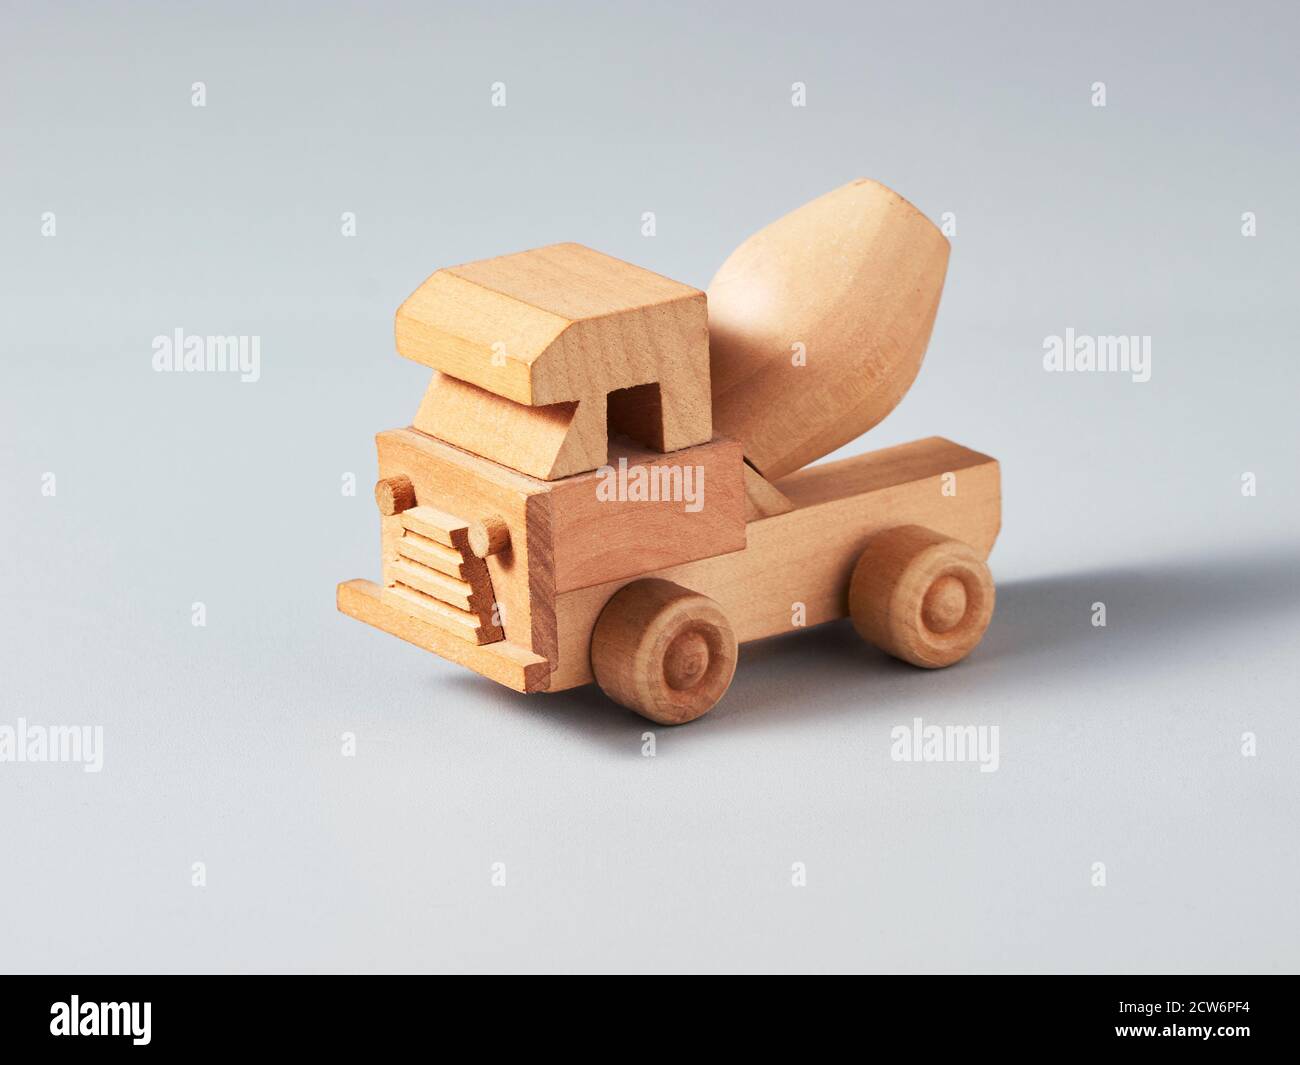 Wooden mixer truck toy on grey background Stock Photo